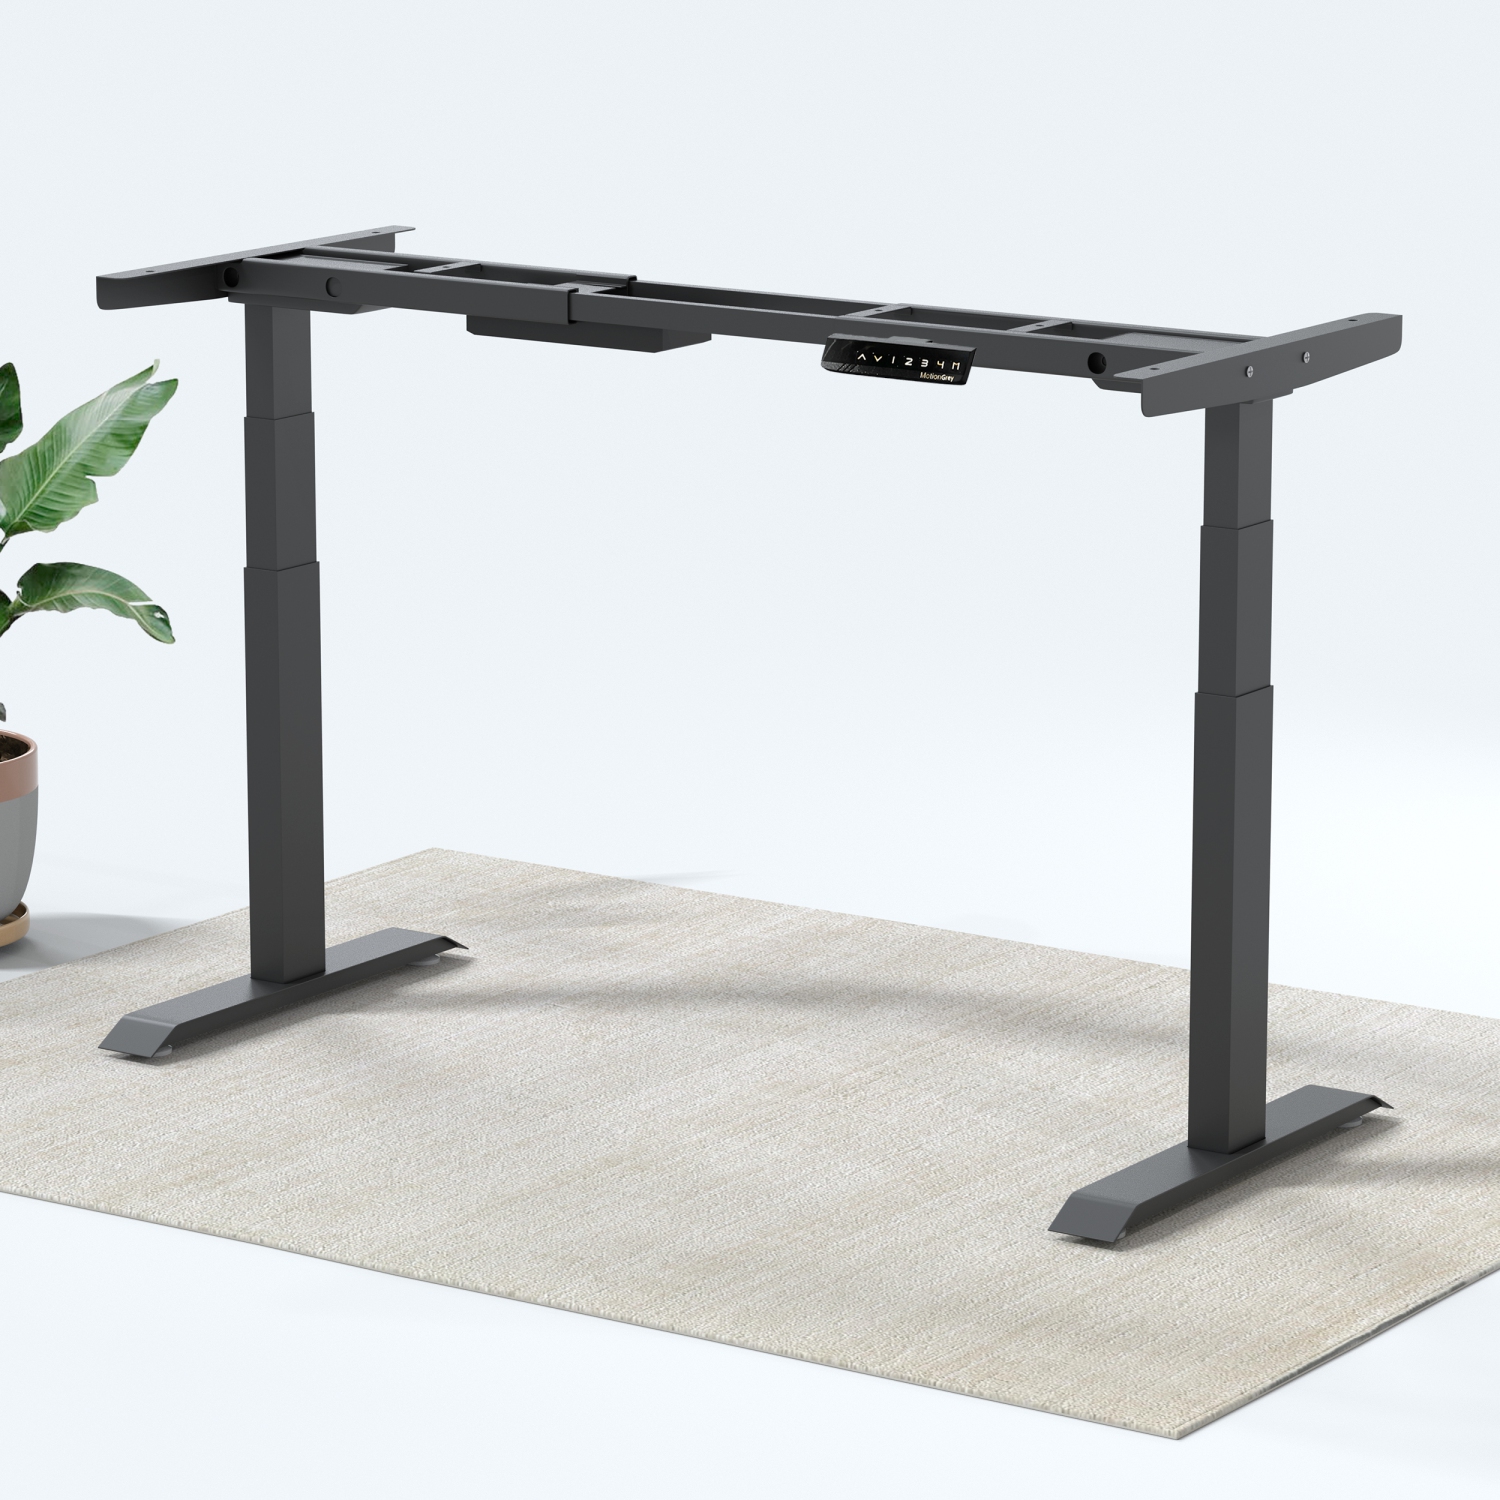 MotionGrey Height Adjustable German Electric Dual Motors Sit to Stand Computer Home and Office Standing Desk Riser - Black Frame